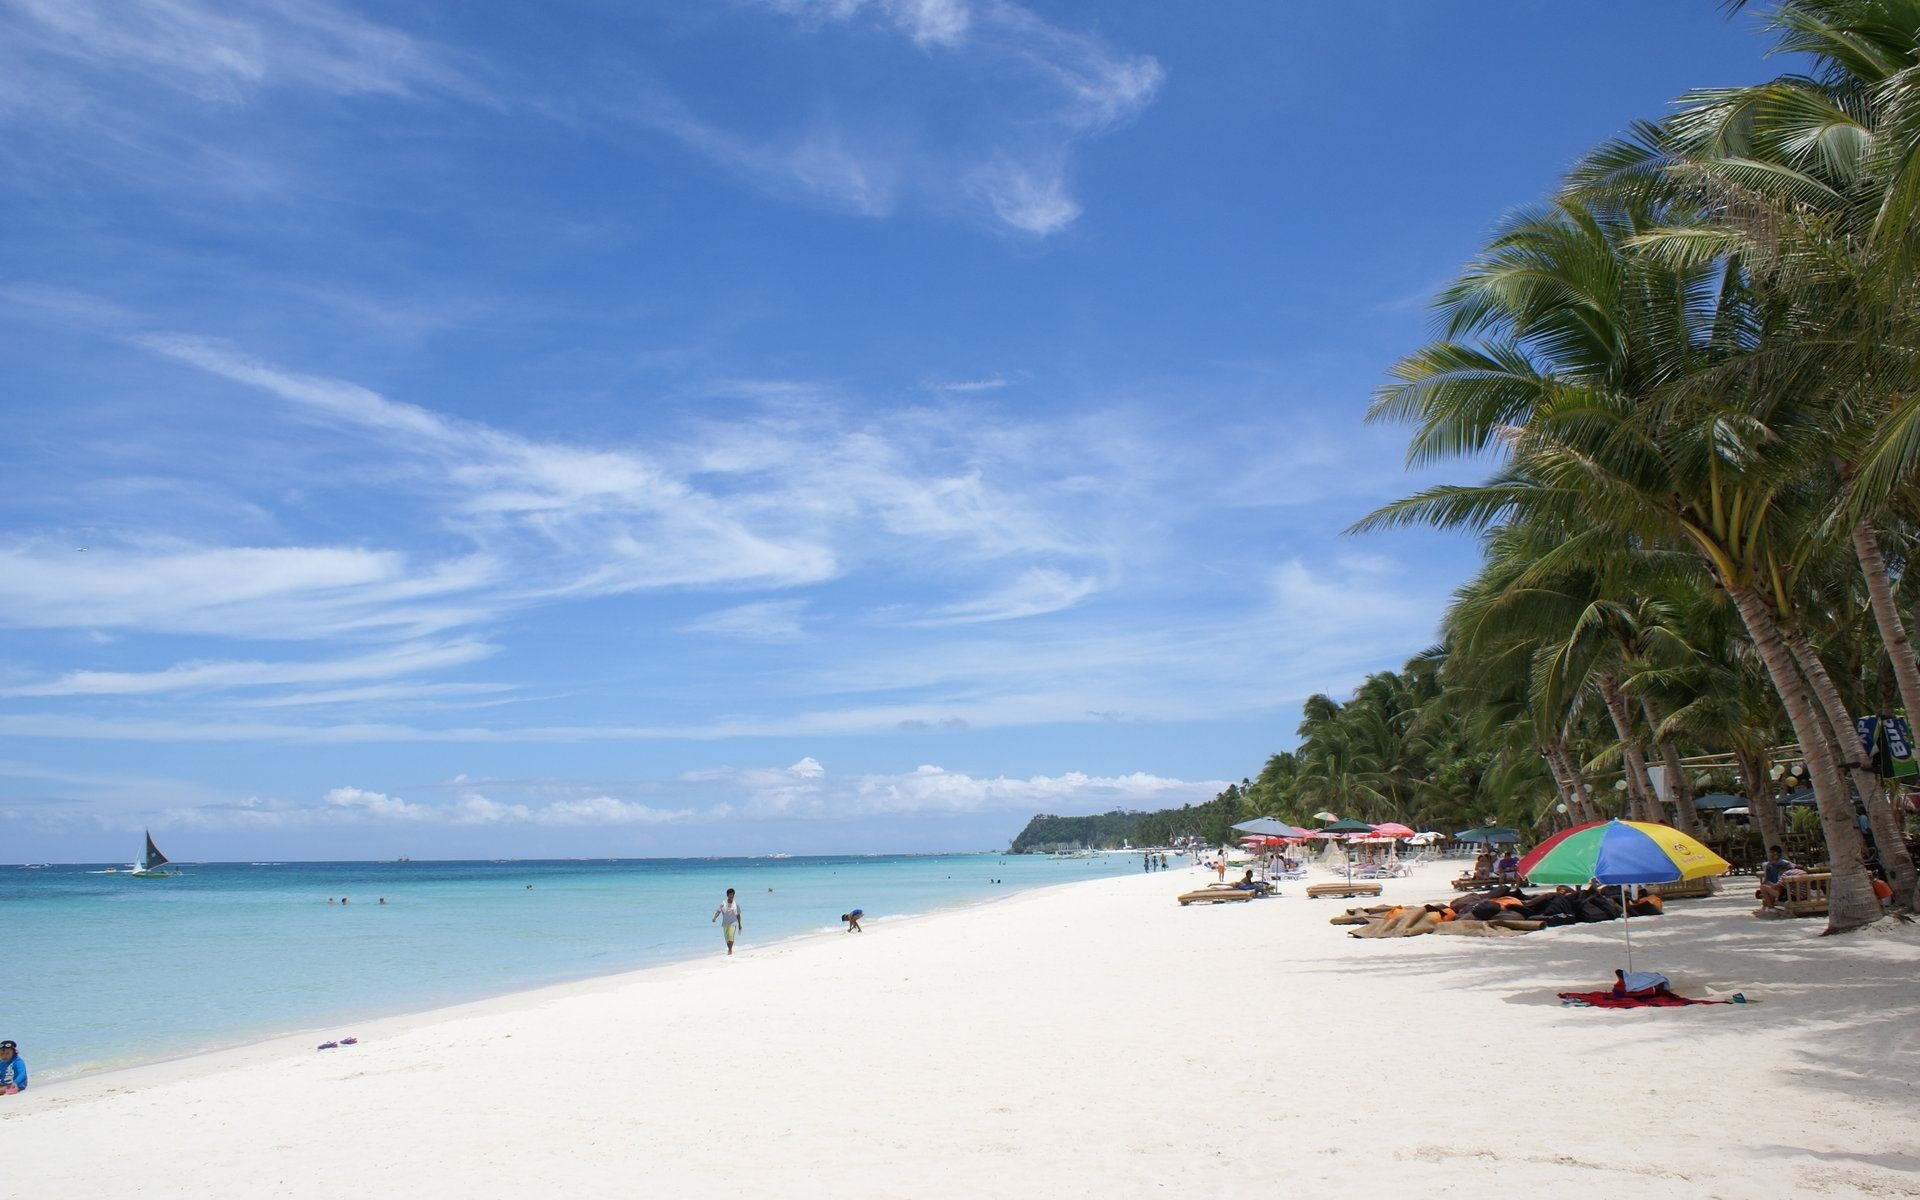 1920x1200 Wallpapers Backgrounds - Beautiful beach wallpapers Boracay island  Philippines